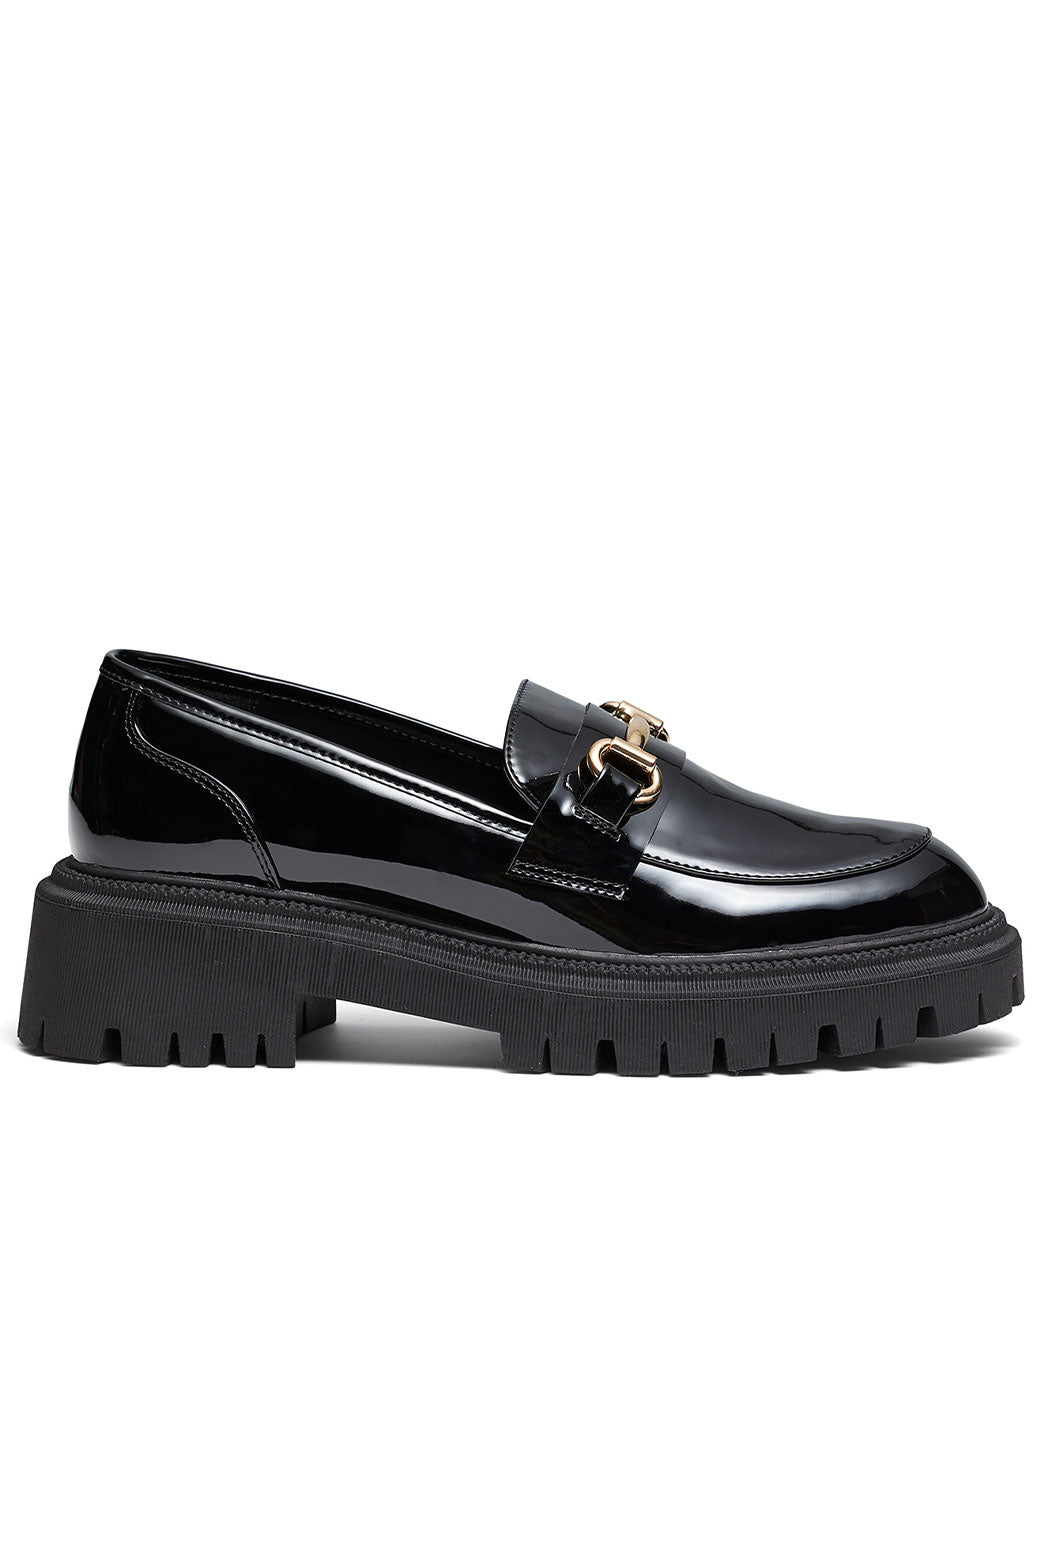 FINAL SALE Therapy Extra Loafers Black Patent